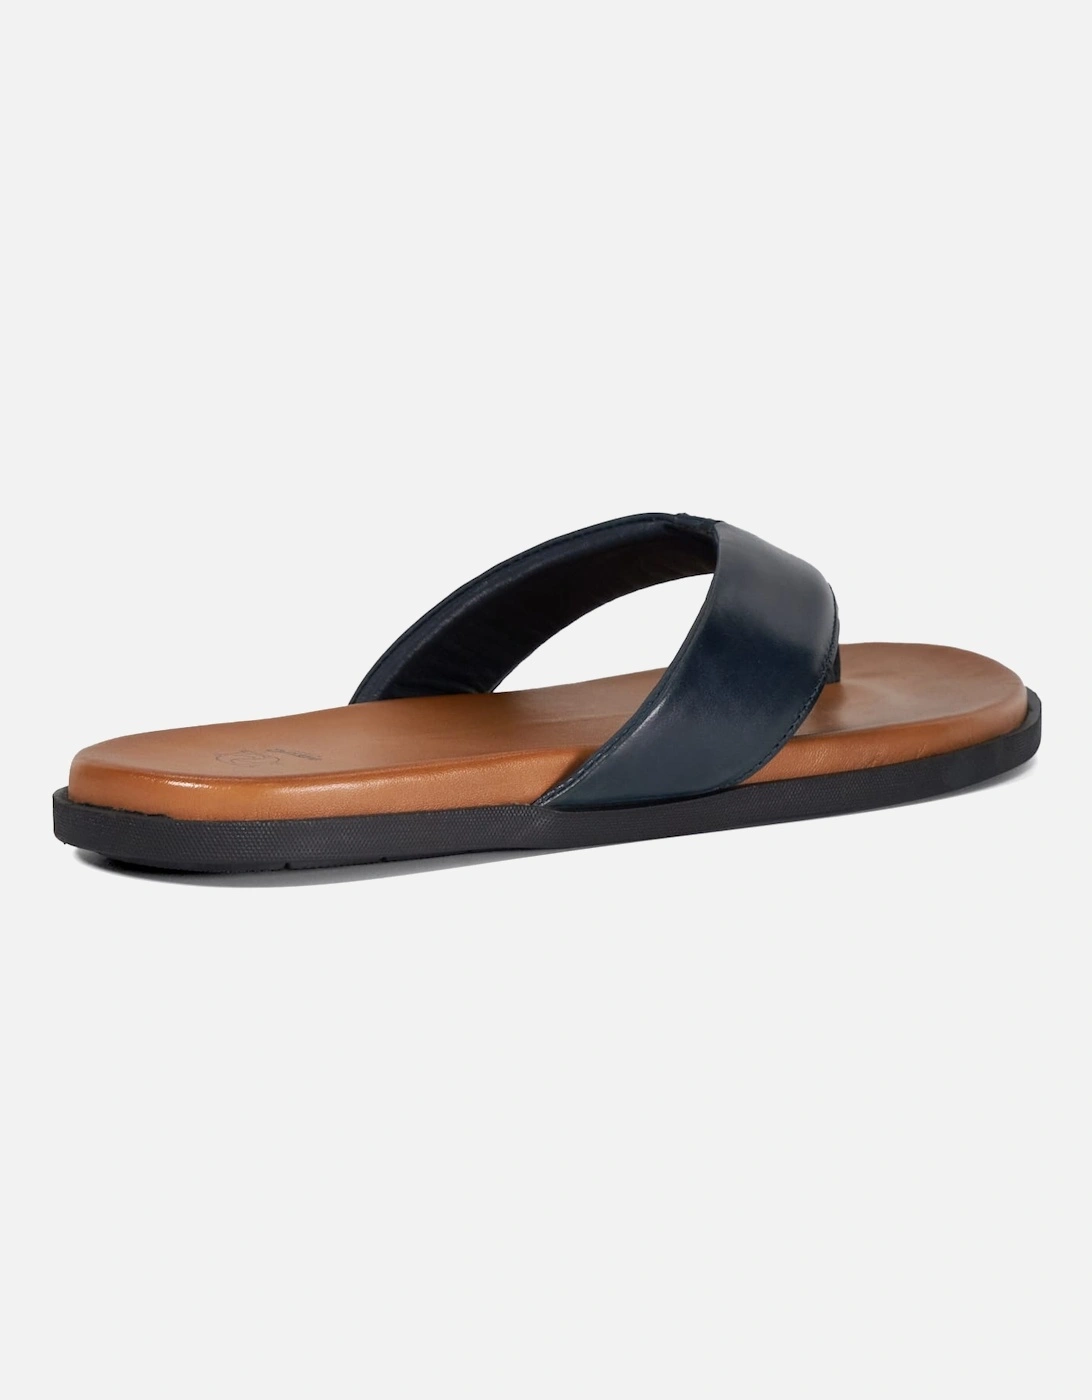 Mens Inspires - Leather Toe-Post Sandals